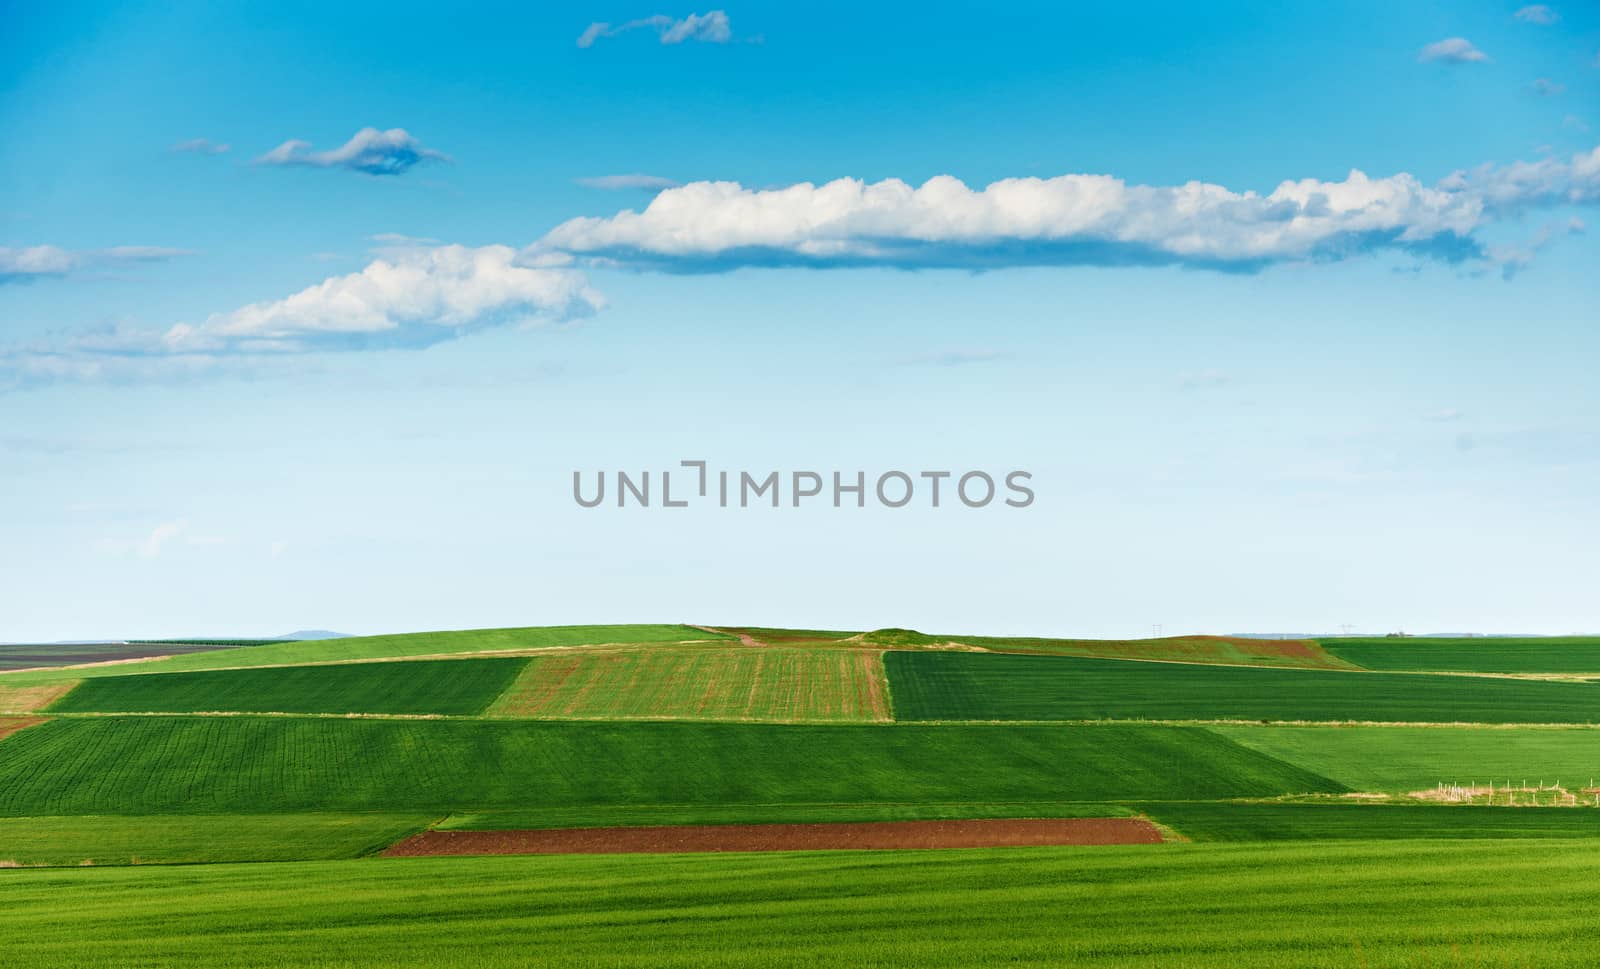 Cultivated land and blue sky in spring season, landscape from South Bulgaria, green wheat plantations